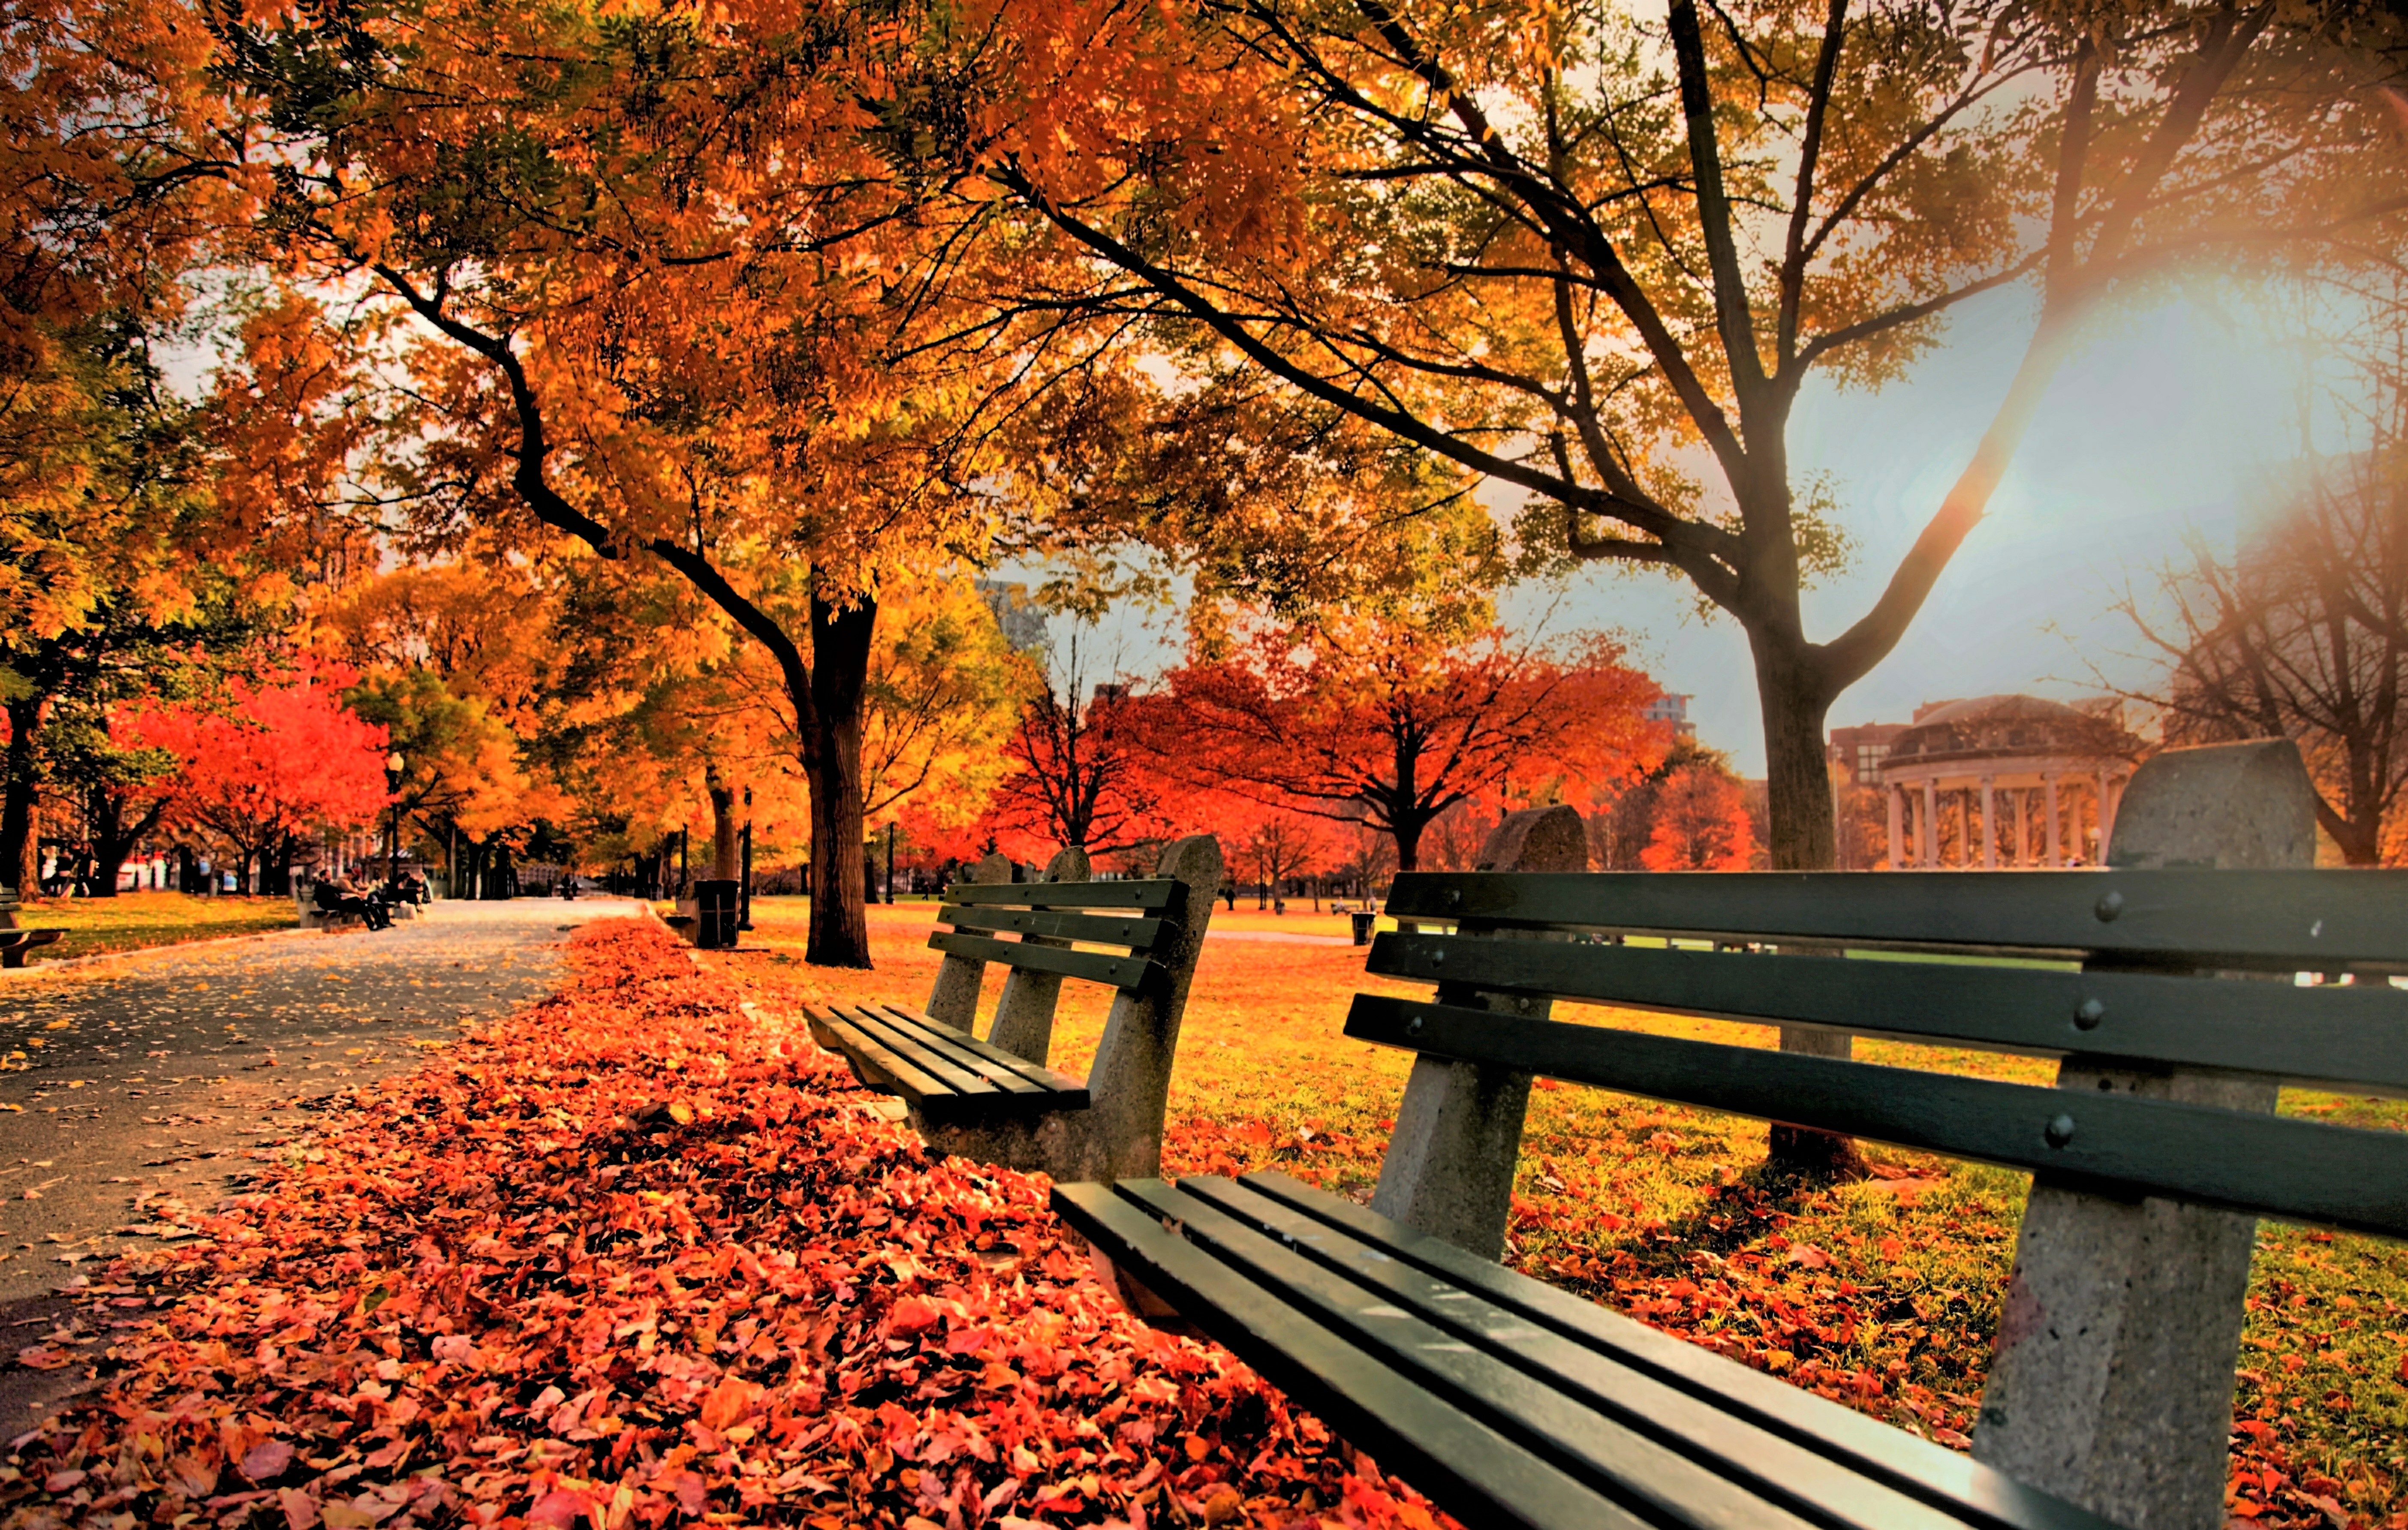 Bench Colorful Fall Leaf Park Tree 5616x3569